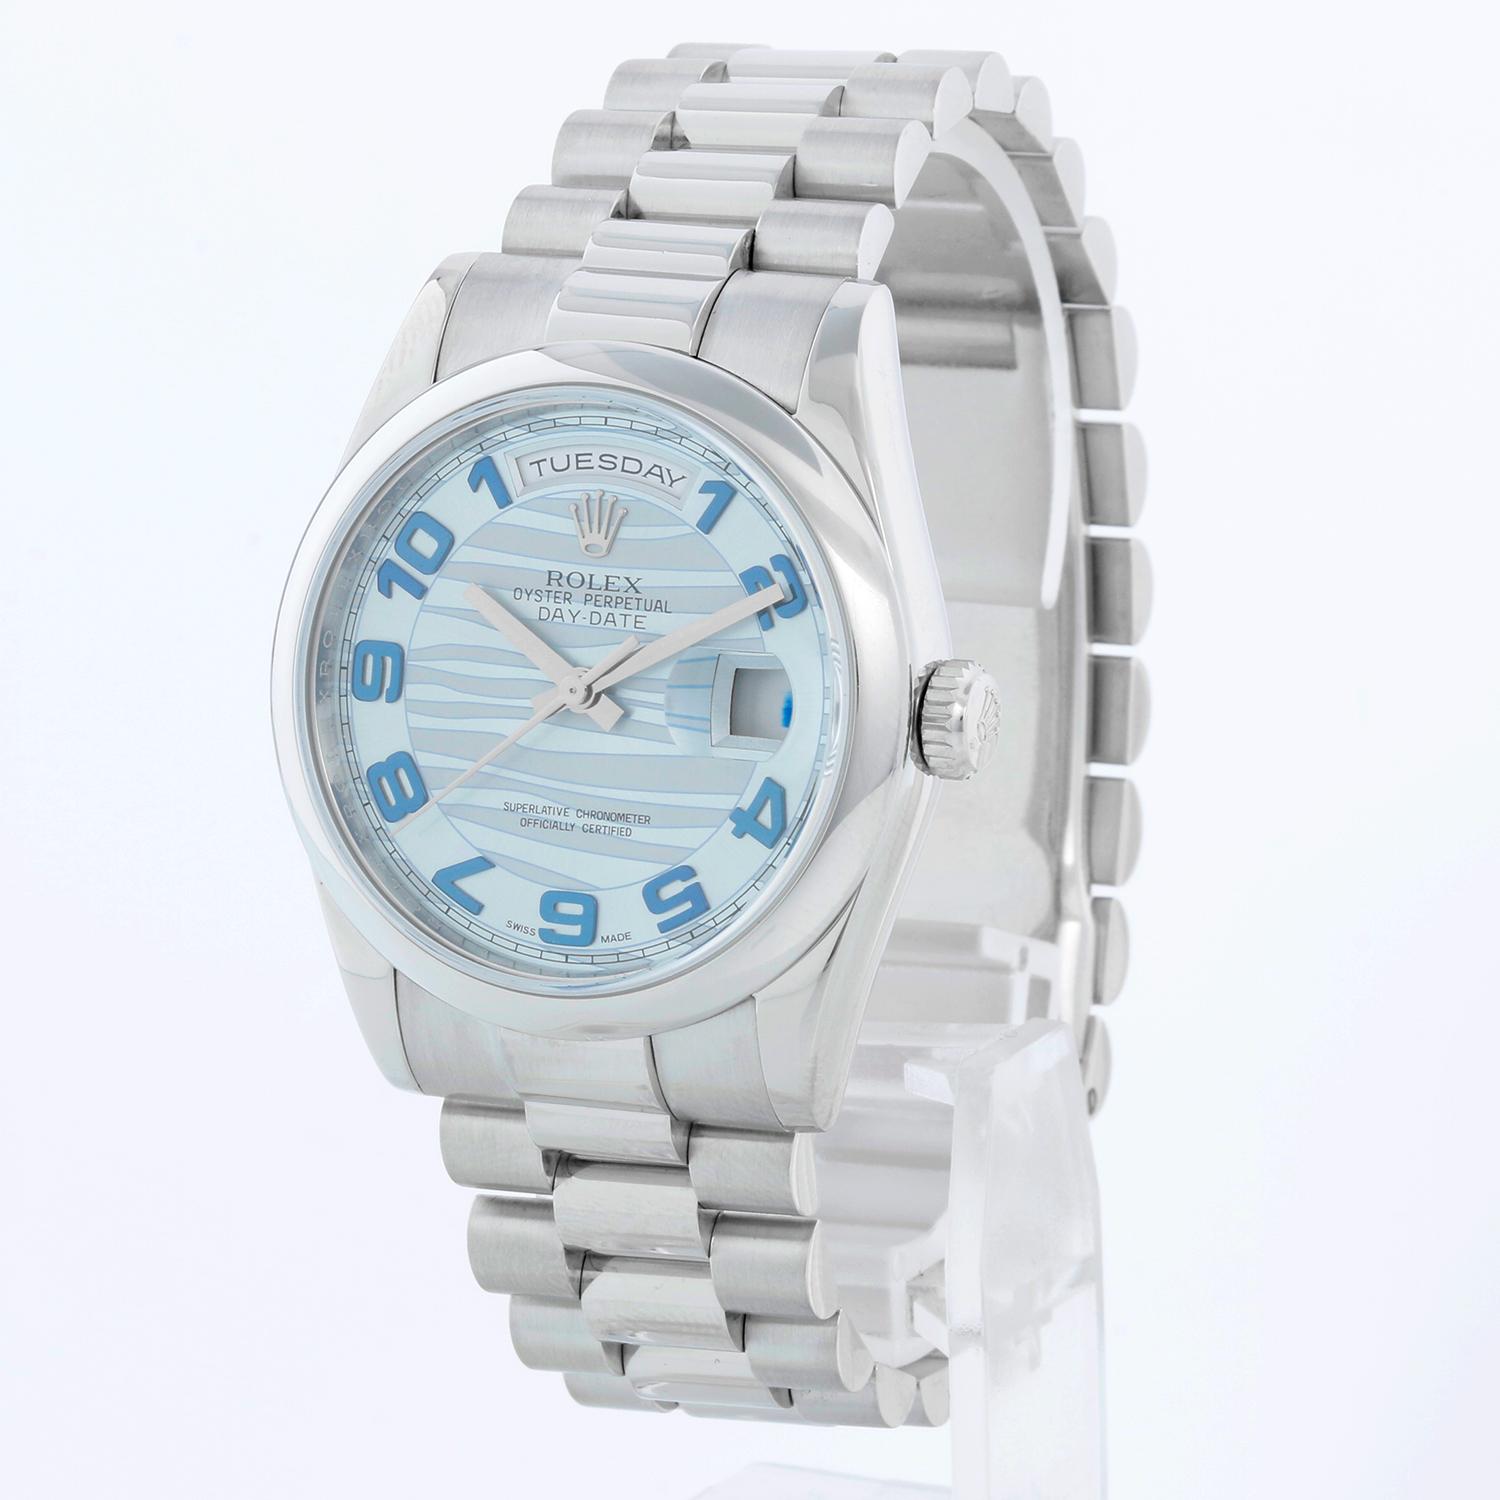 Rolex Platinum President  Day-Date Men's Watch 118206 - Automatic winding, 31 jewels, Quickset, sapphire crystal. Platinum case with smooth bezel . Glacier blue wave dial . Platinum hidden clasp President bracelet. Pre-owned with box and books.